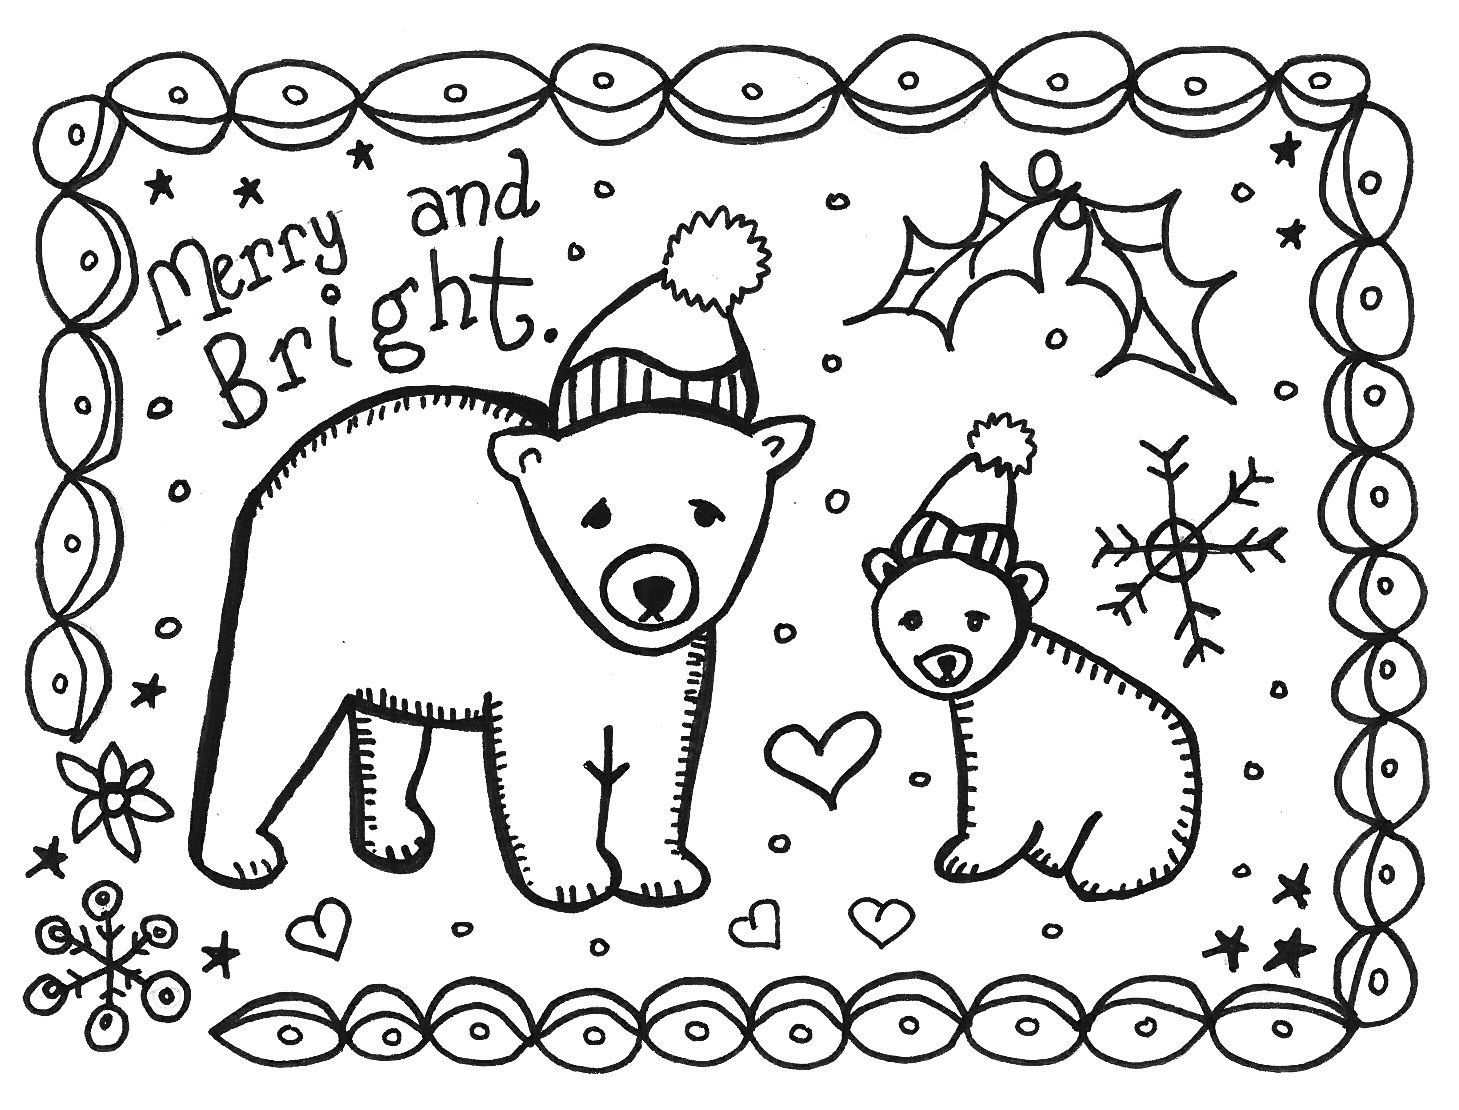 8 Best Images Of Printable Christmas Cards To Color - Free - Free Printable Christmas Cards To Color